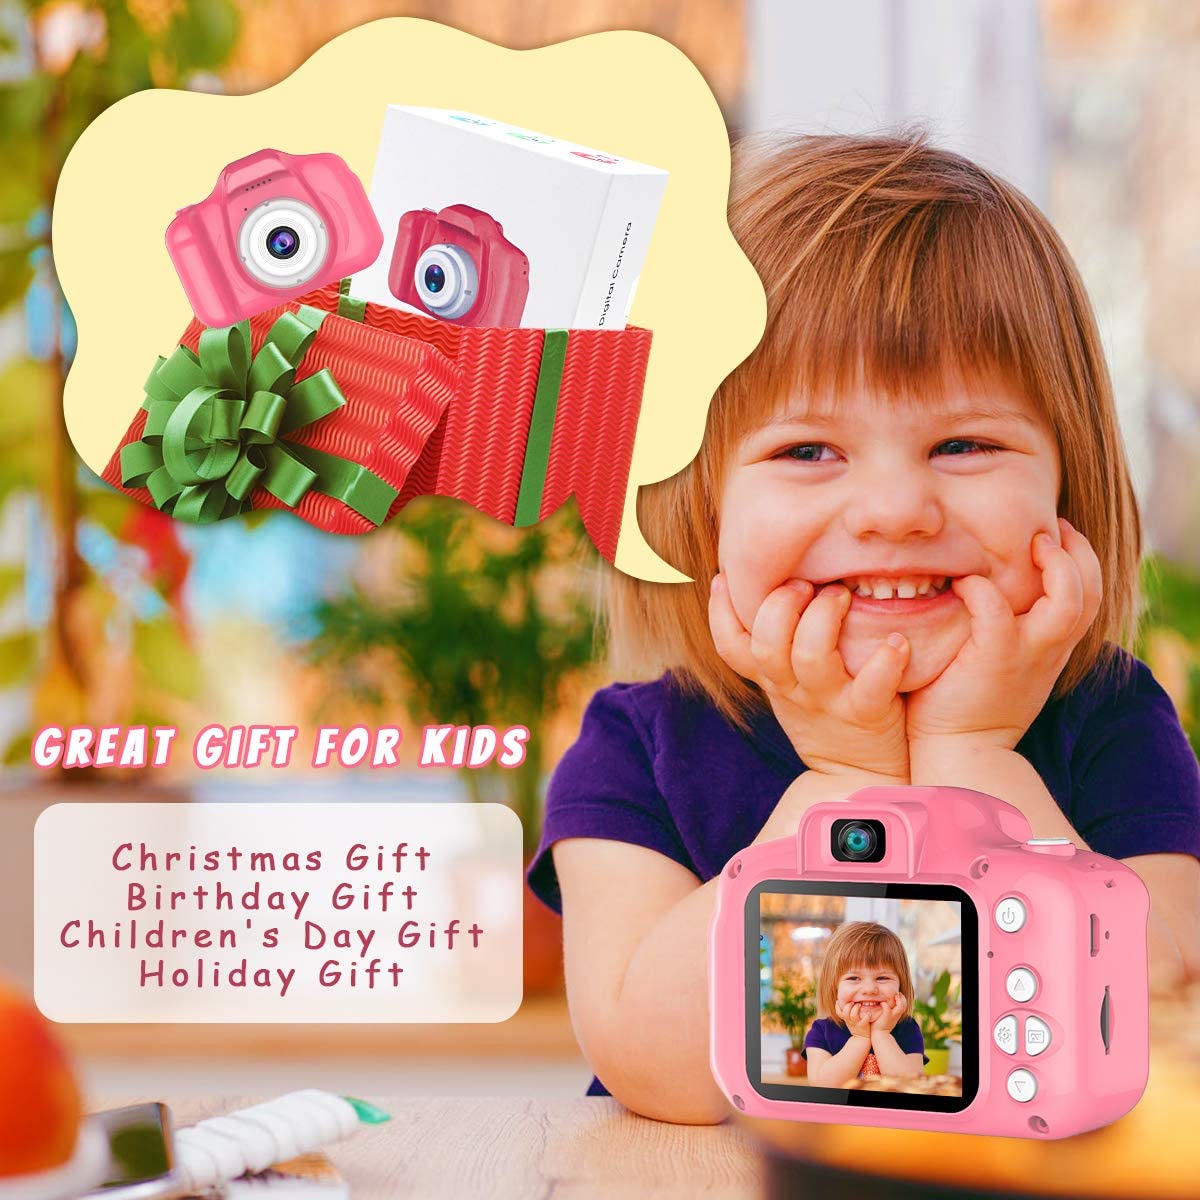 BAISIQI Selfie Cameras for Kids, Toy for 3-8 Year Old Girls Children Digital Cameras with 32 GB Card Video Music Electronic Game Toy Birthday Christmas Idea Gift for Toddler Girls Pink Presents